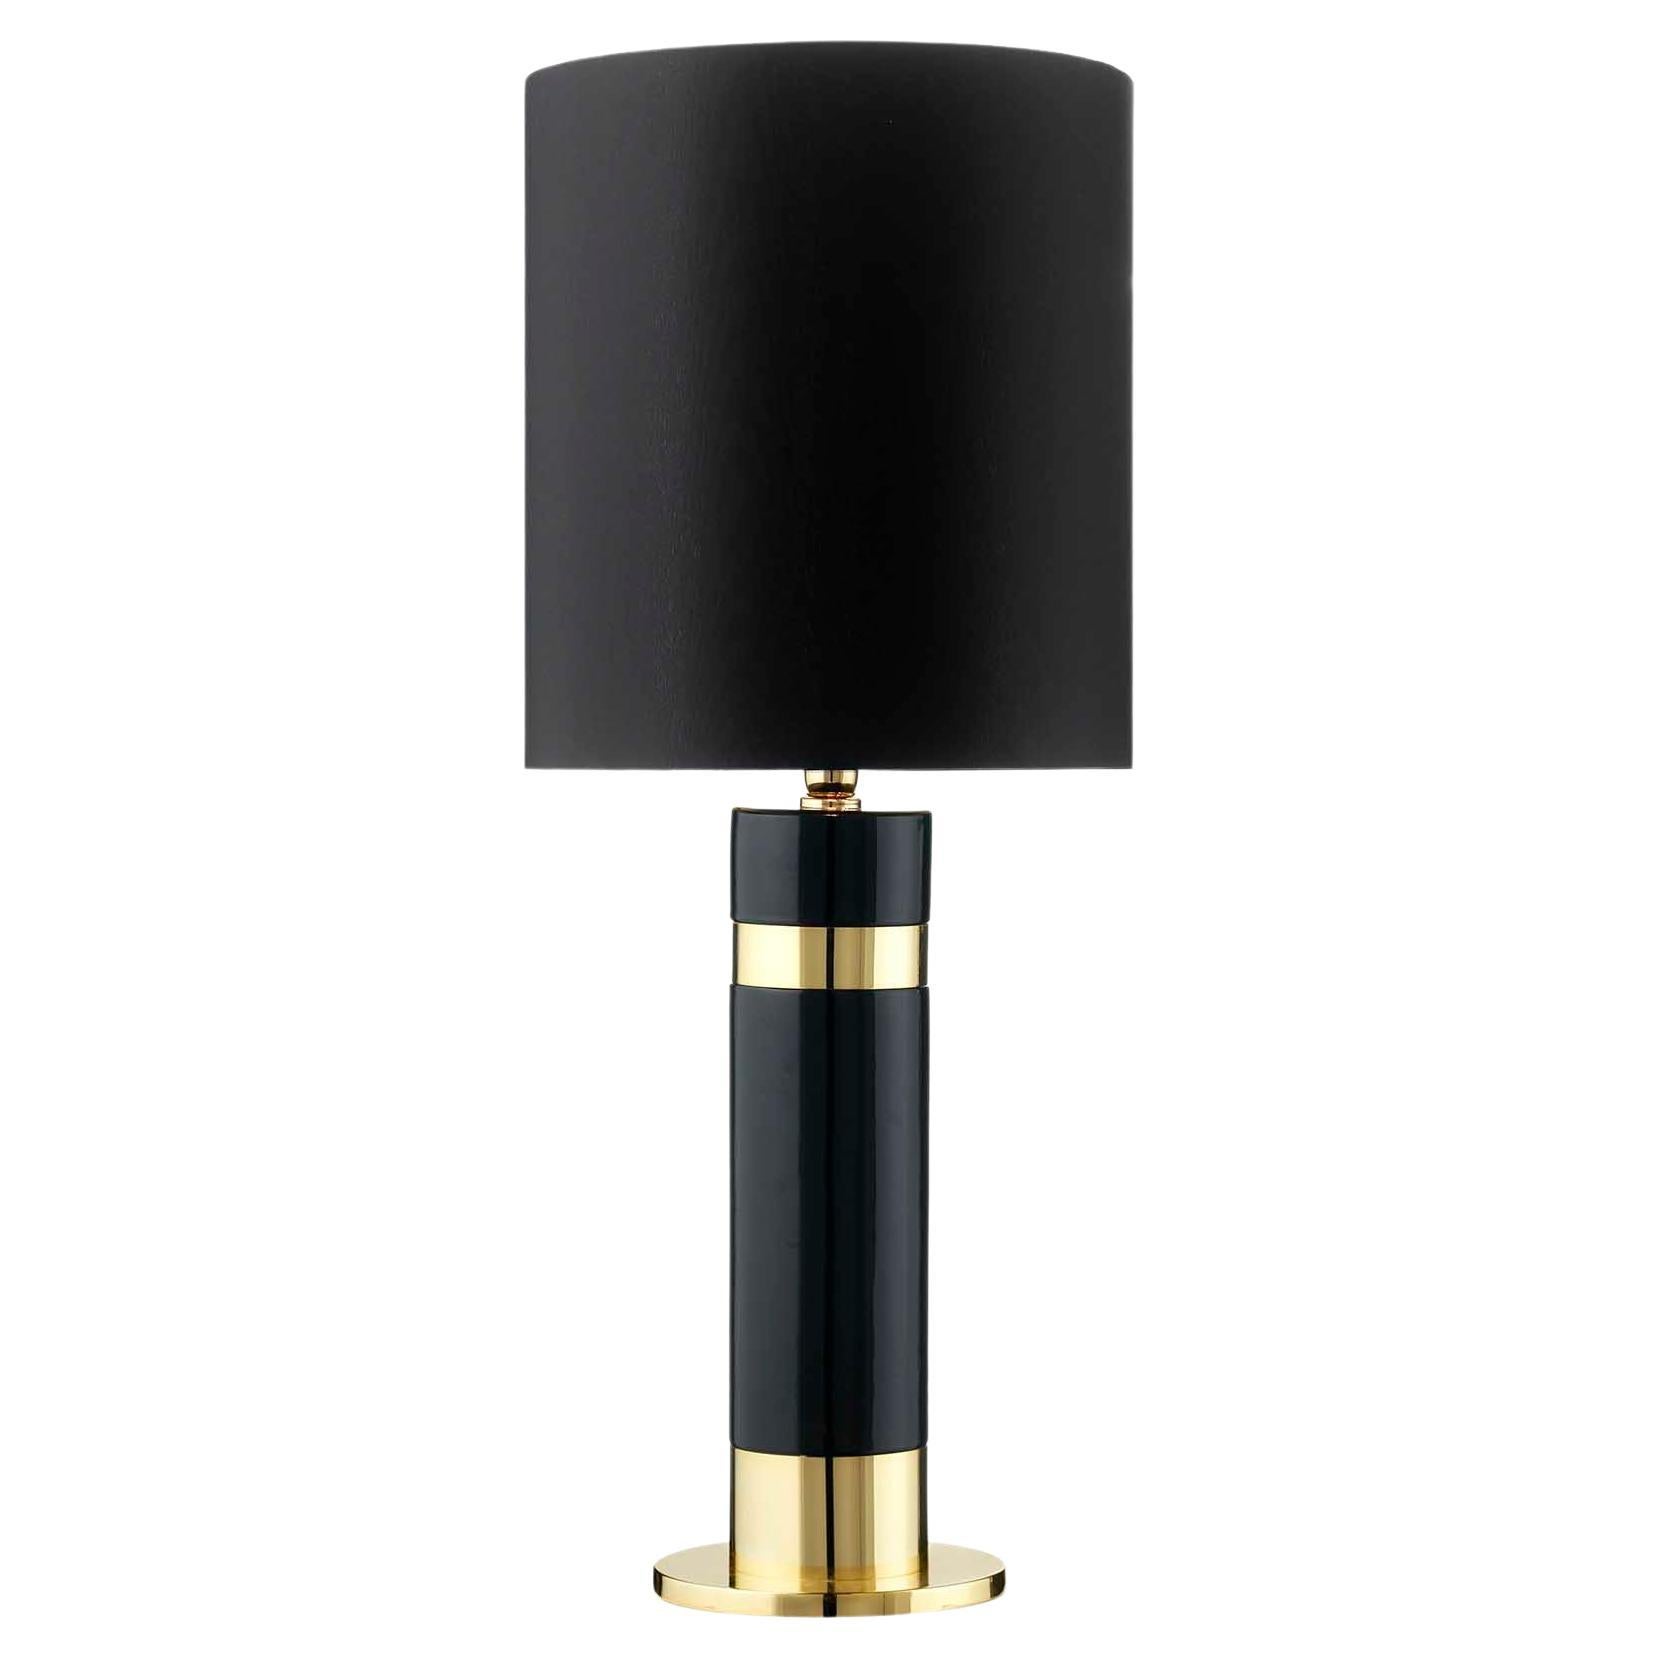 Ceramic table lamp HERMES 2
cod. LHE002
finished in black enamel and 
24-karat gold 
with cotton lampshade

Measures: height 115.0 cm., diameter 40.0 cm.
 